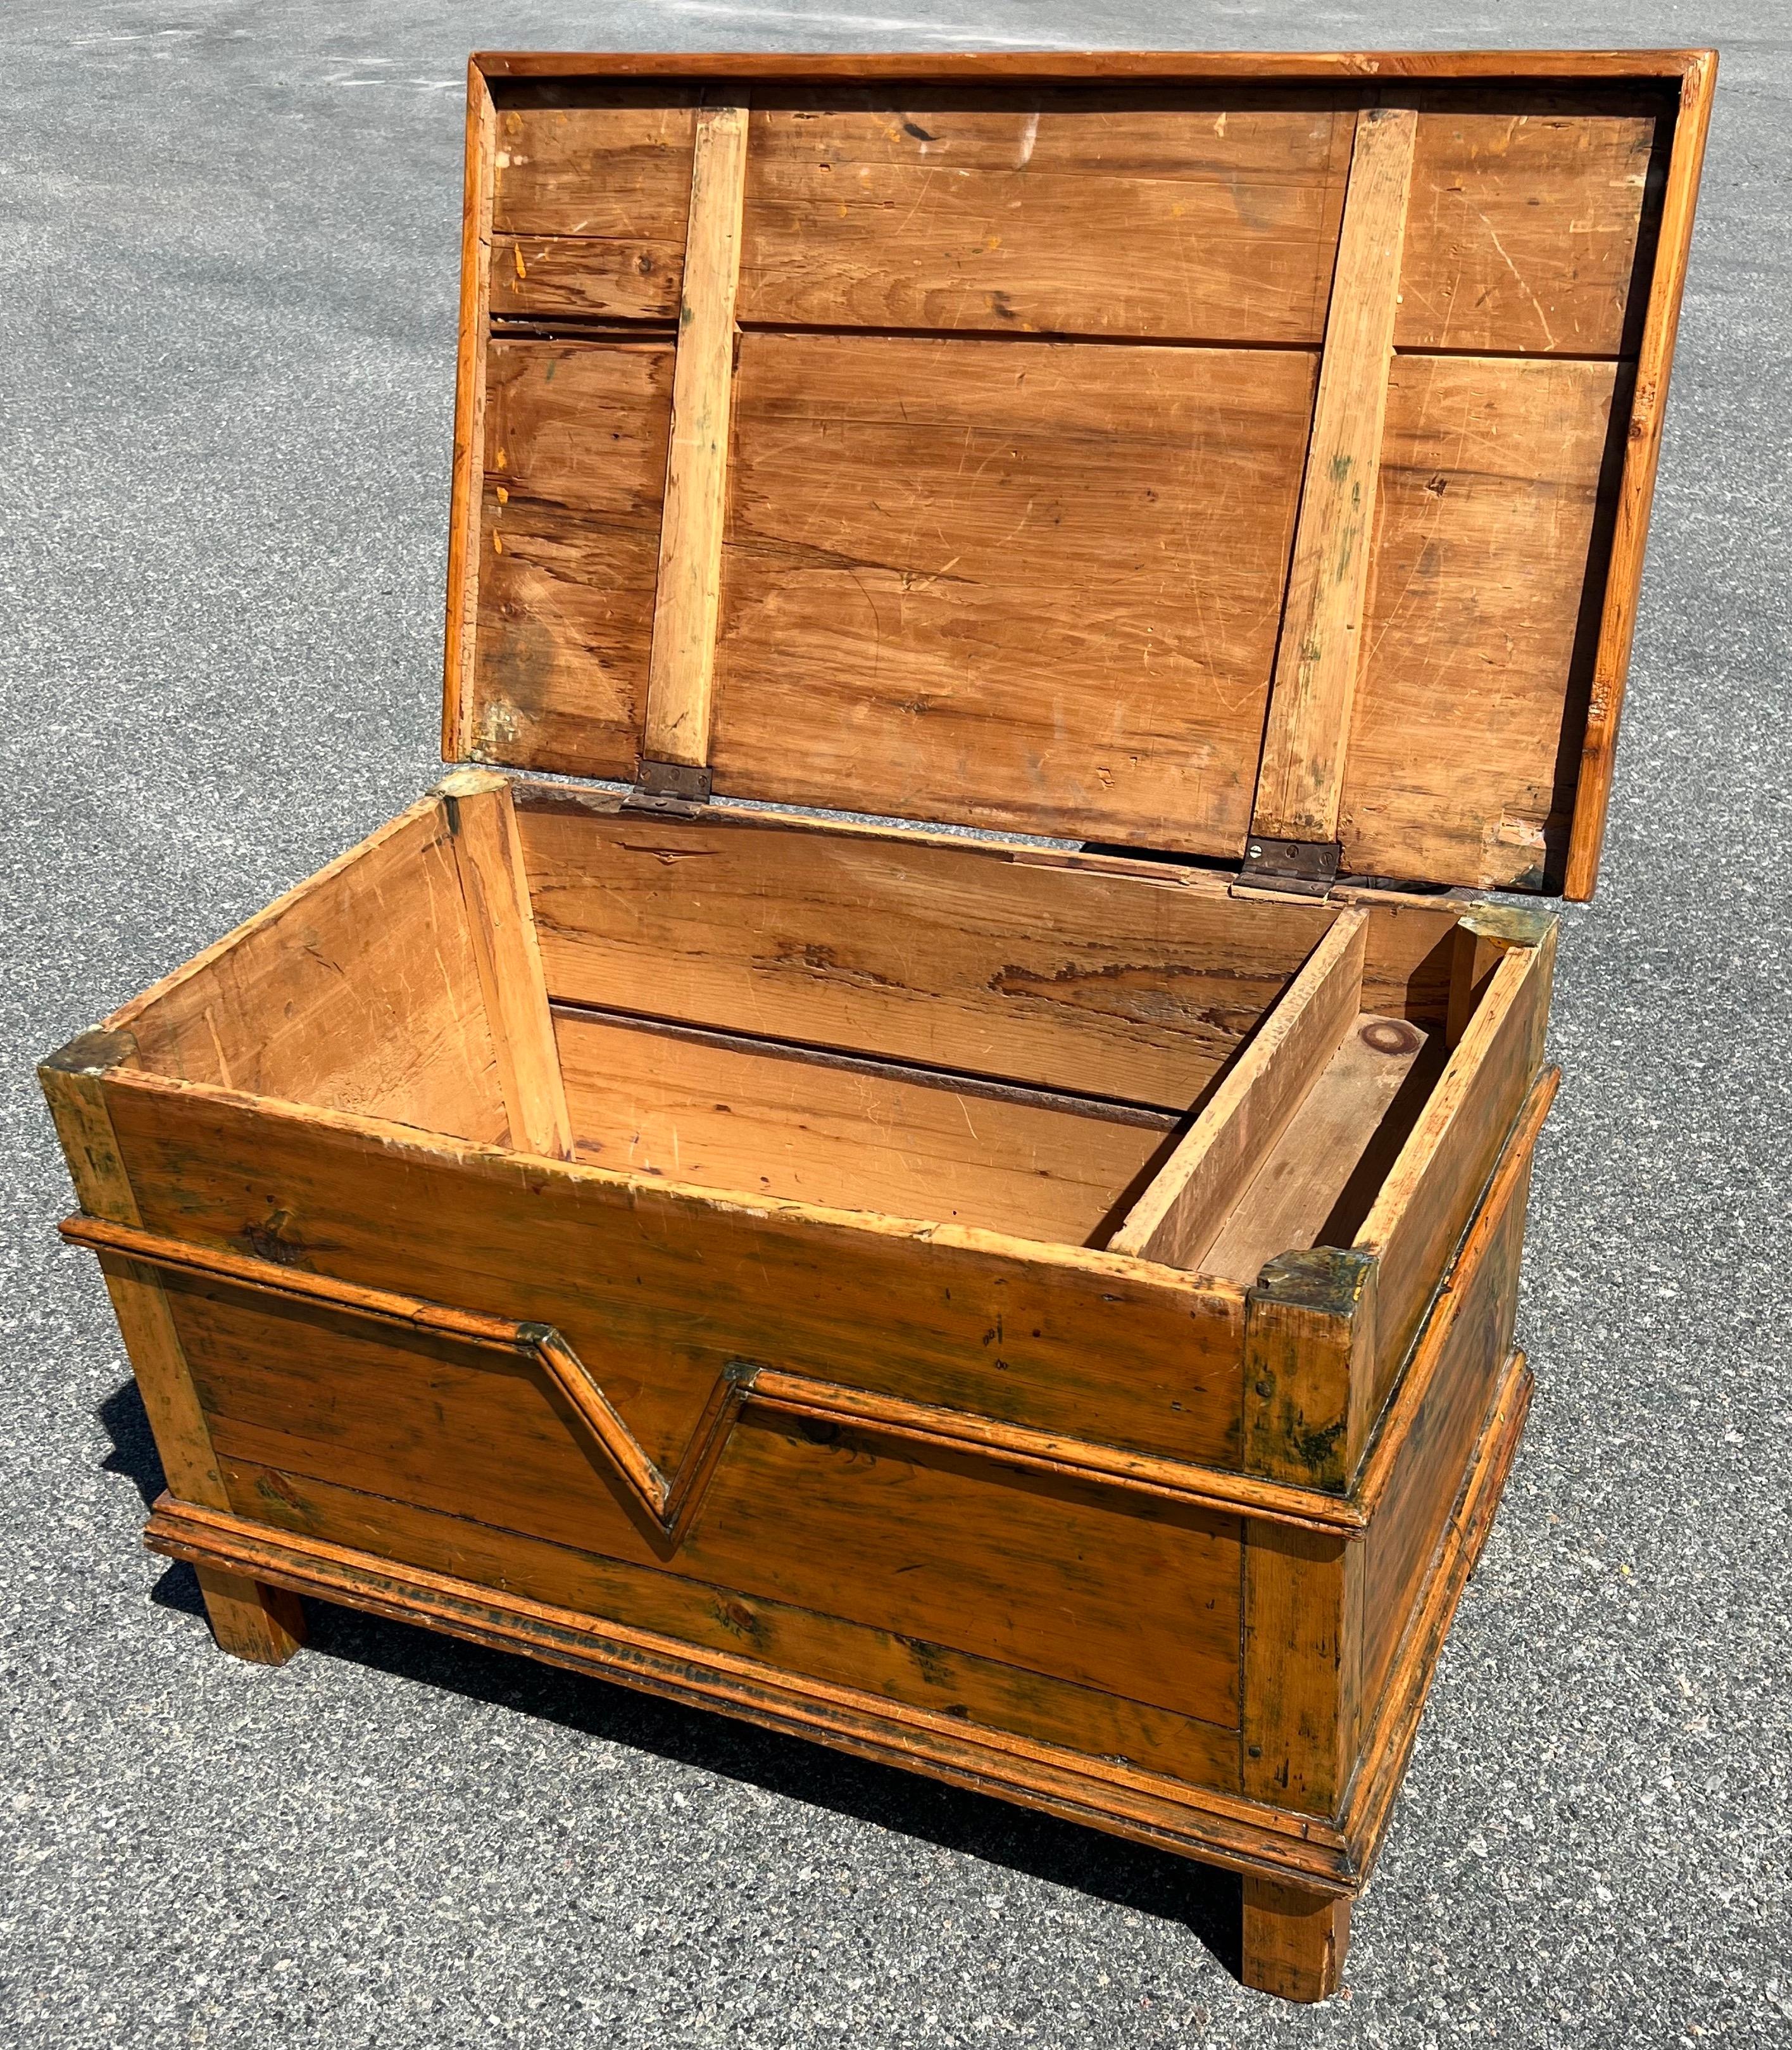 Hand-Crafted 19th Century Pine Chest with Applied 